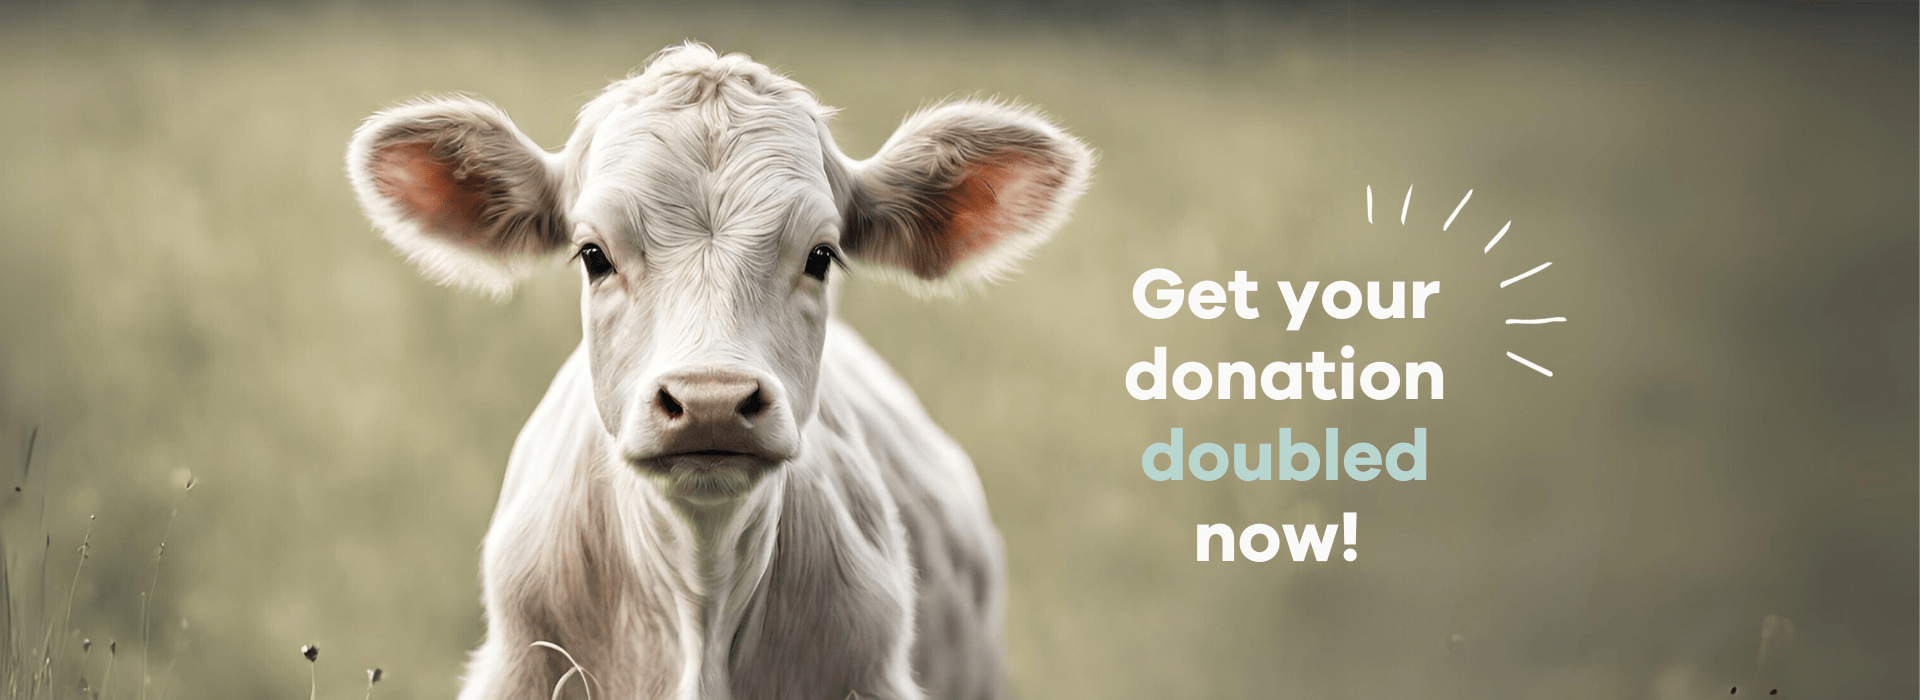 One donation, double the impact!